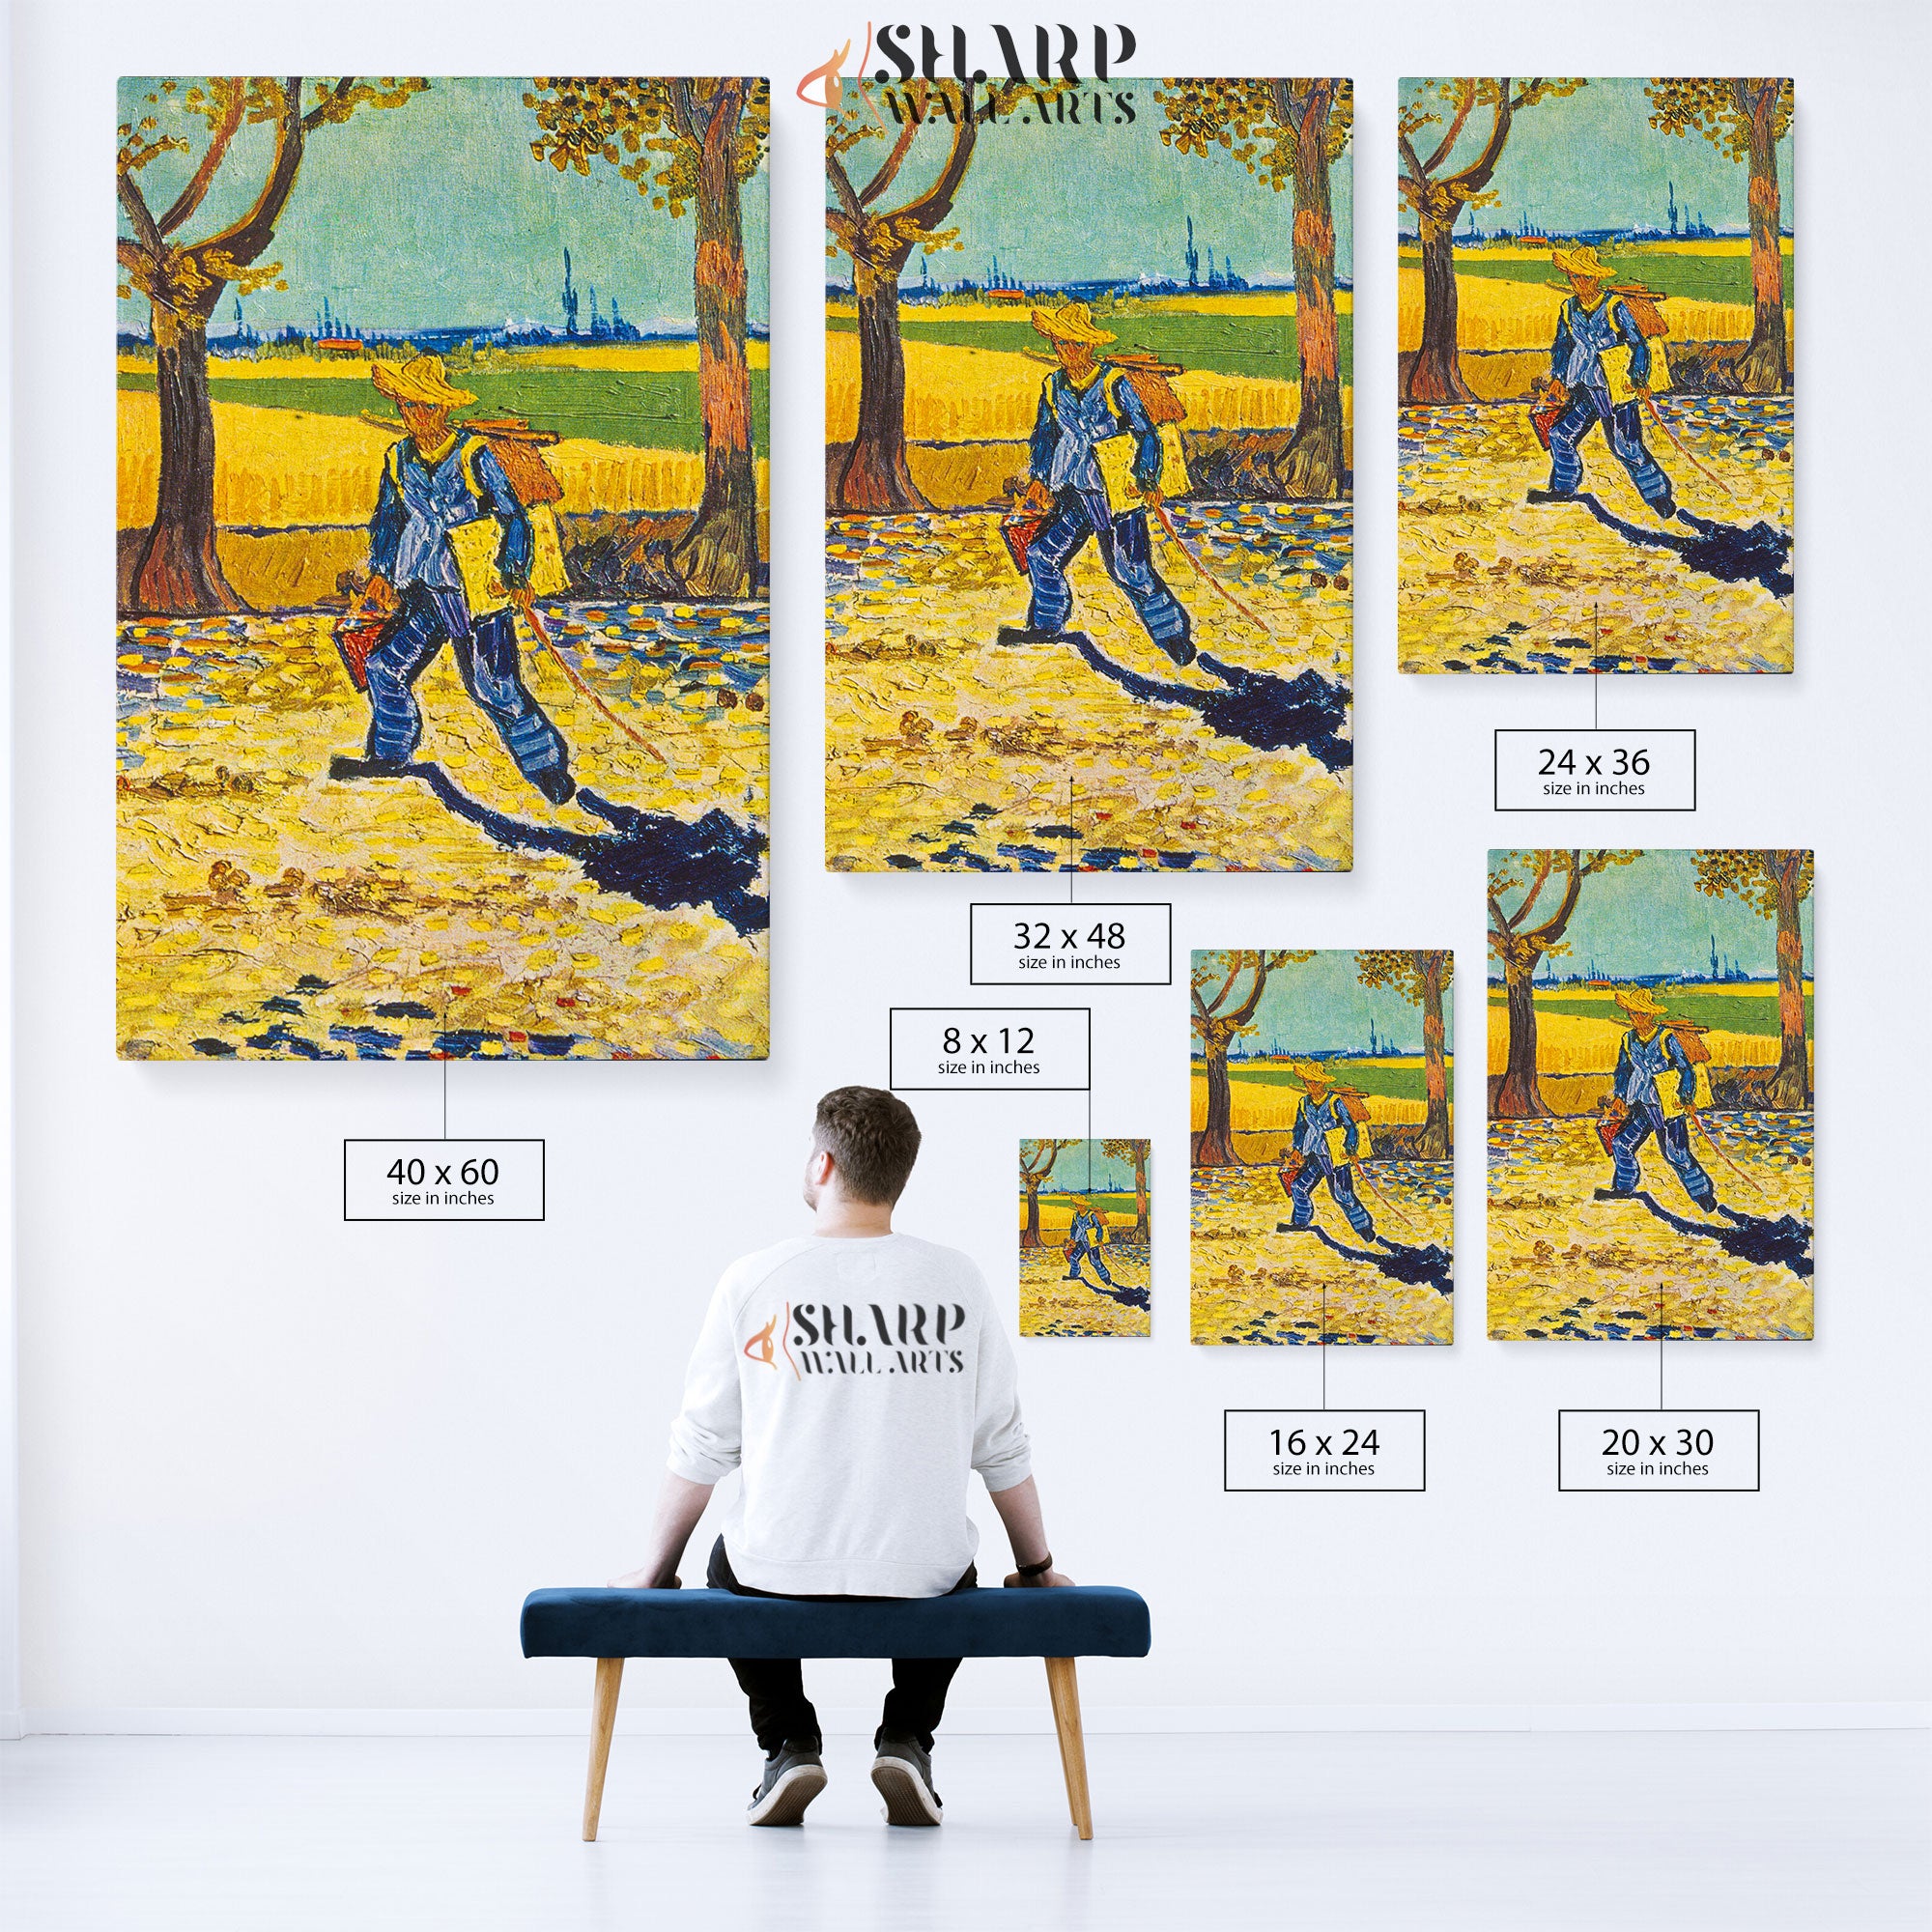 Vincent van Gogh The Painter On His Way To Work Canvas Wall Art